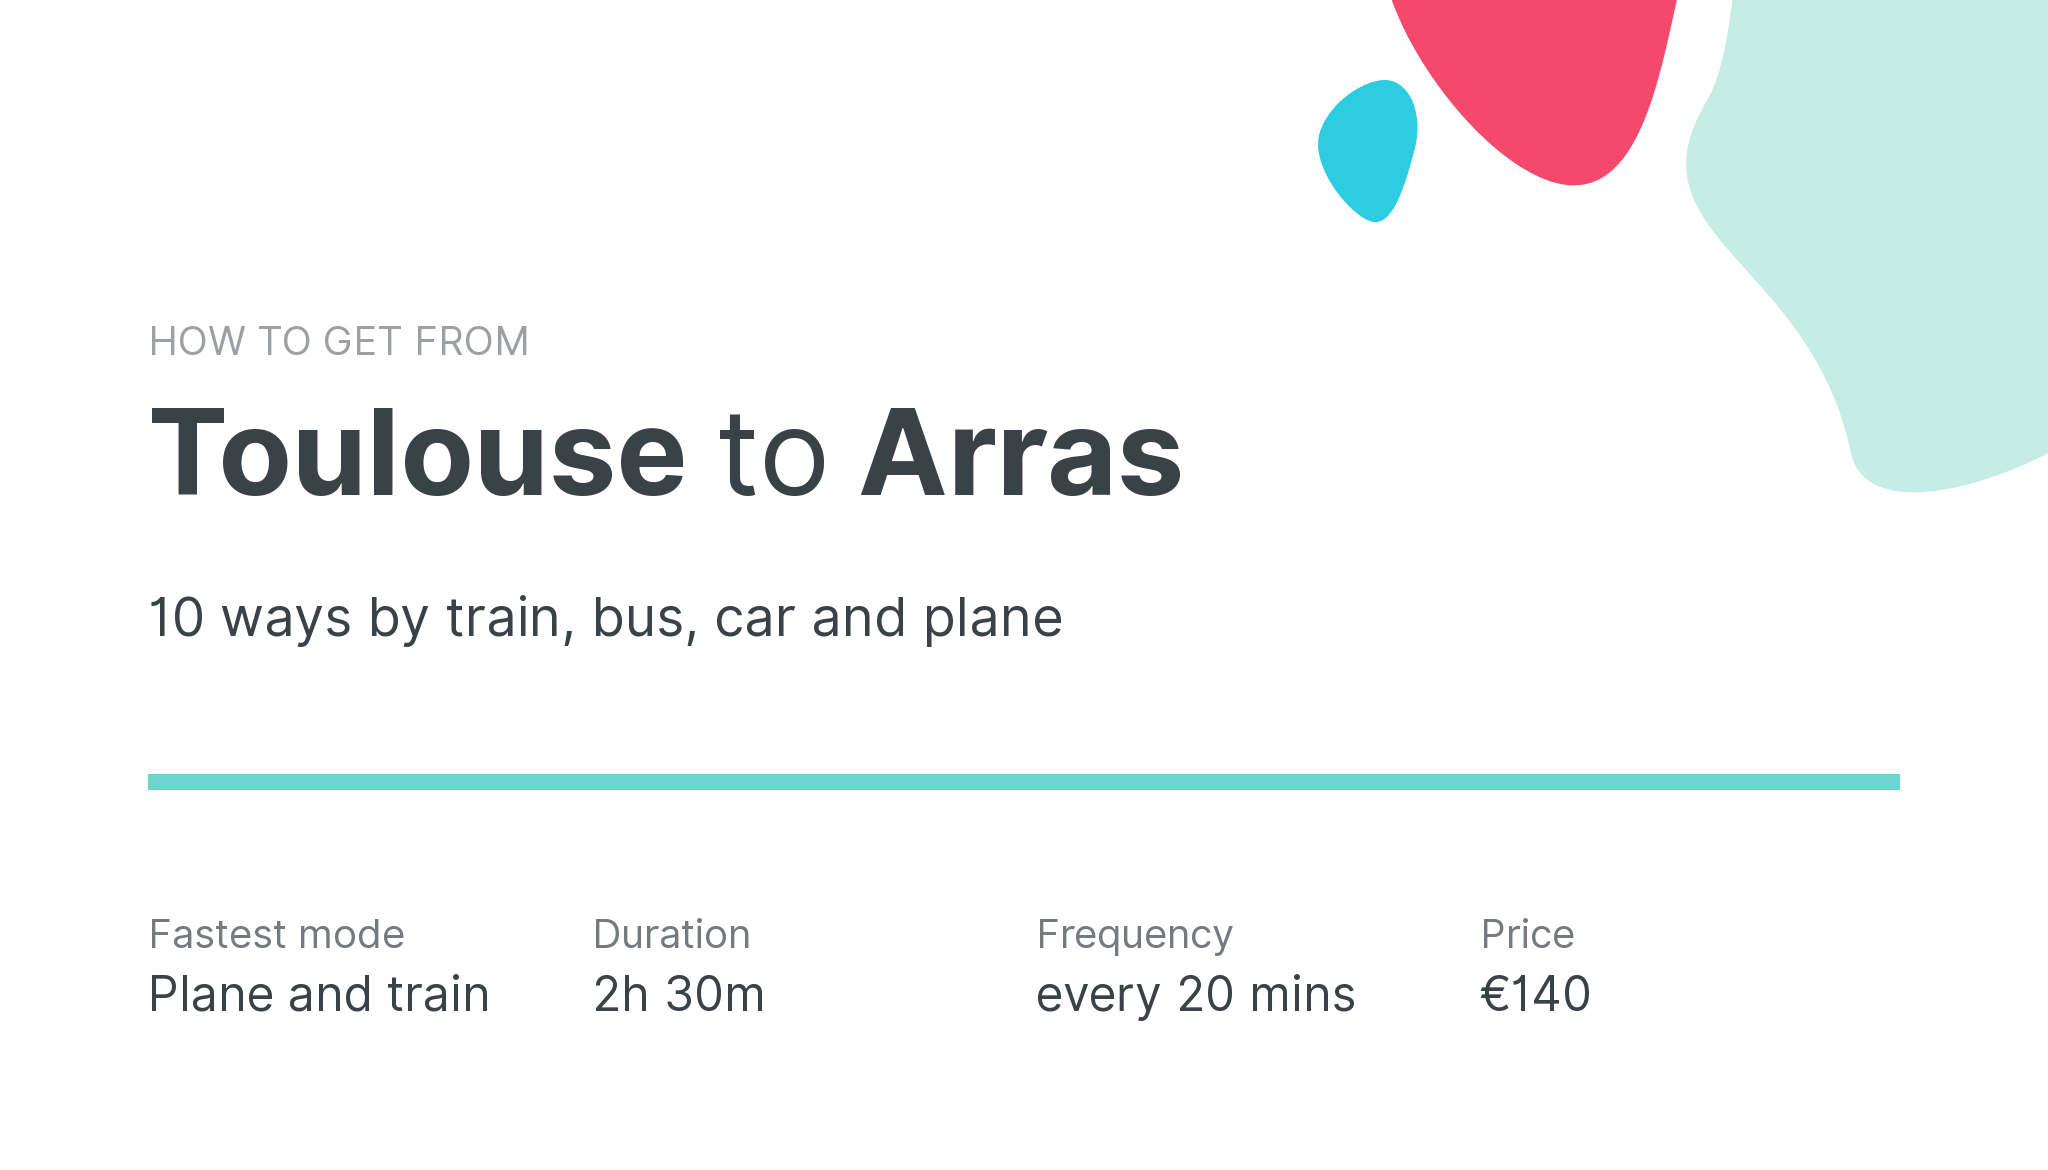 How do I get from Toulouse to Arras